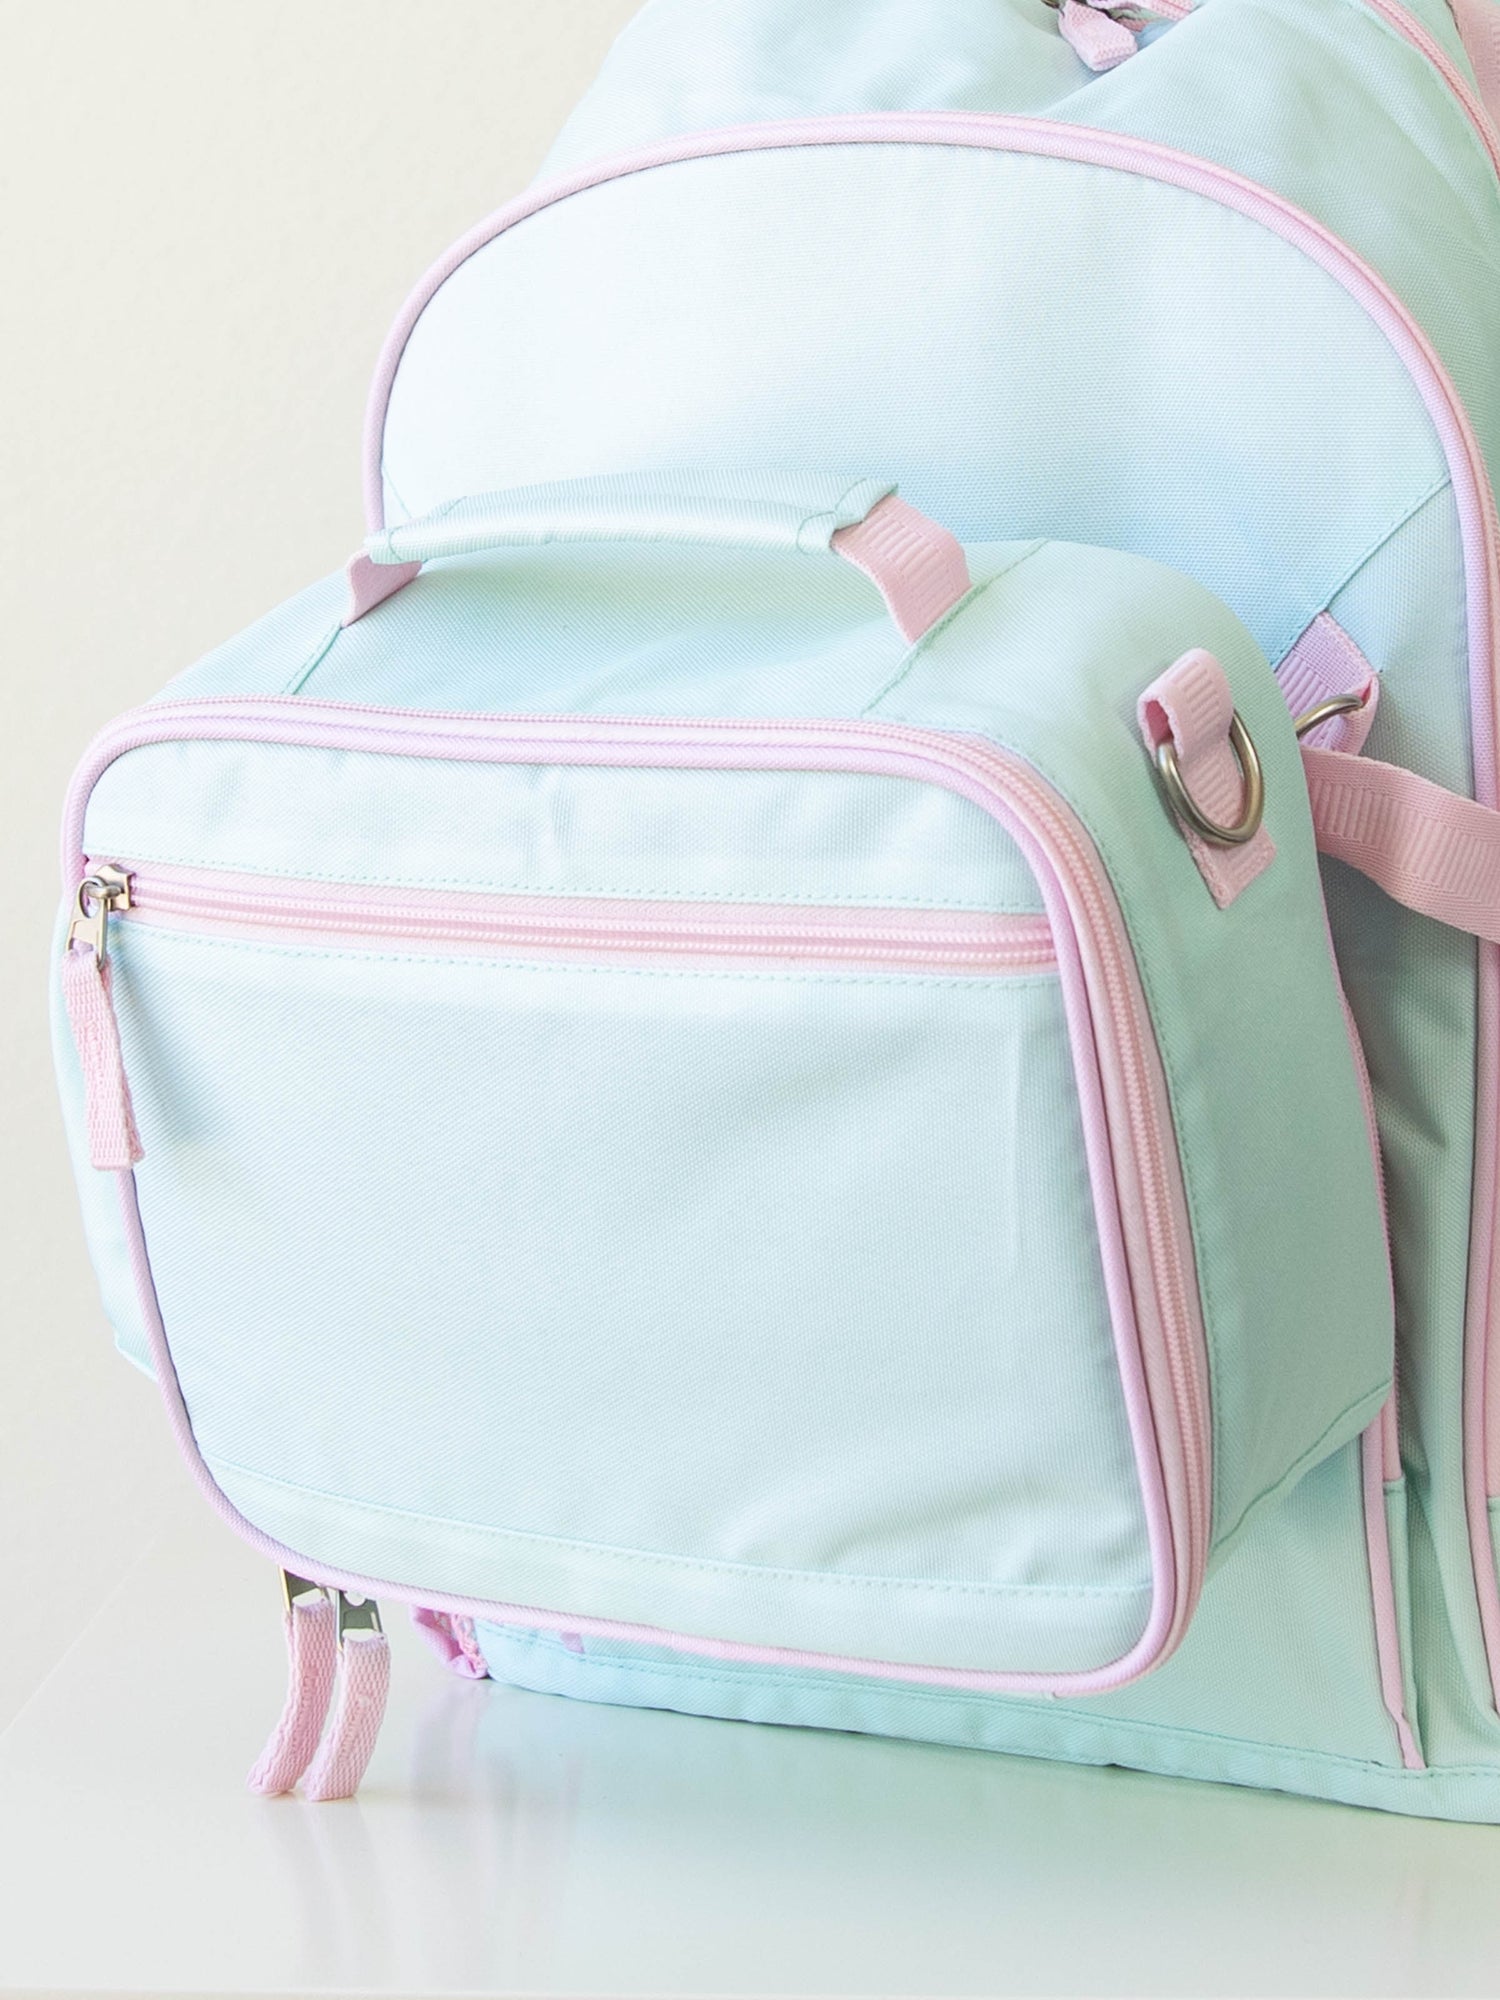 Up We Go 14.5 Backpack with Lunch Bag - Unicorn